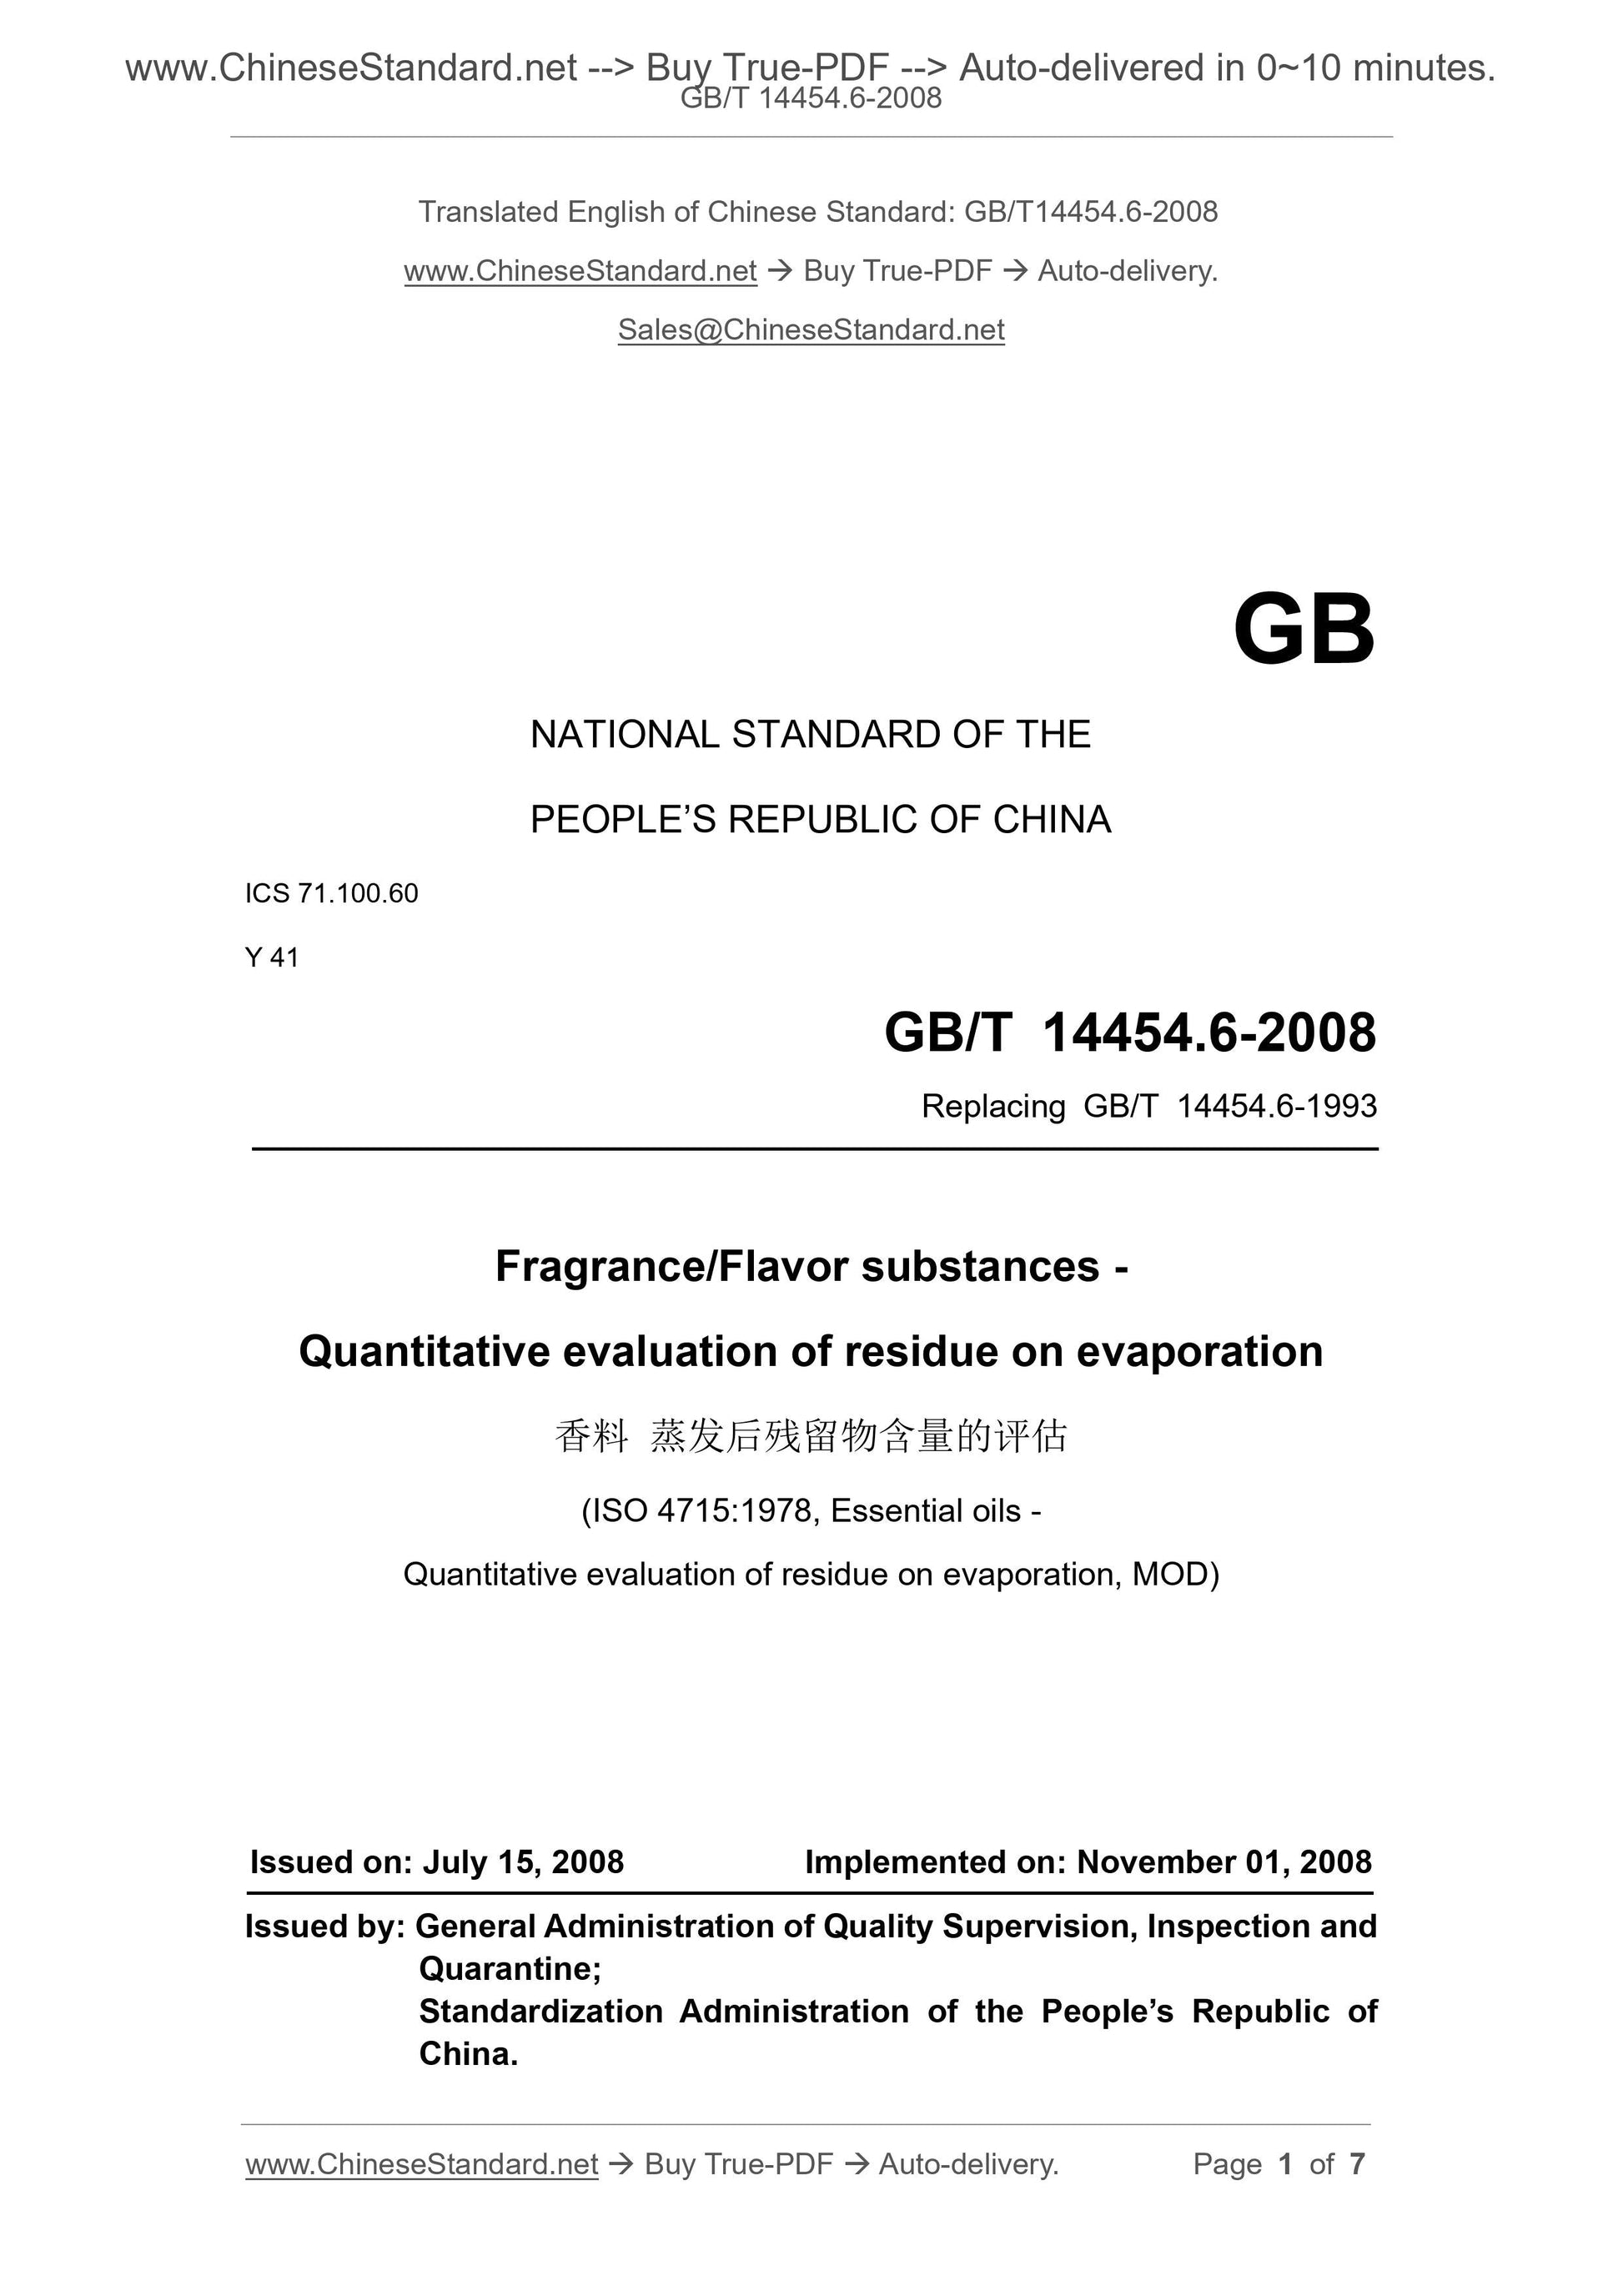 GB/T 14454.6-2008 Page 1